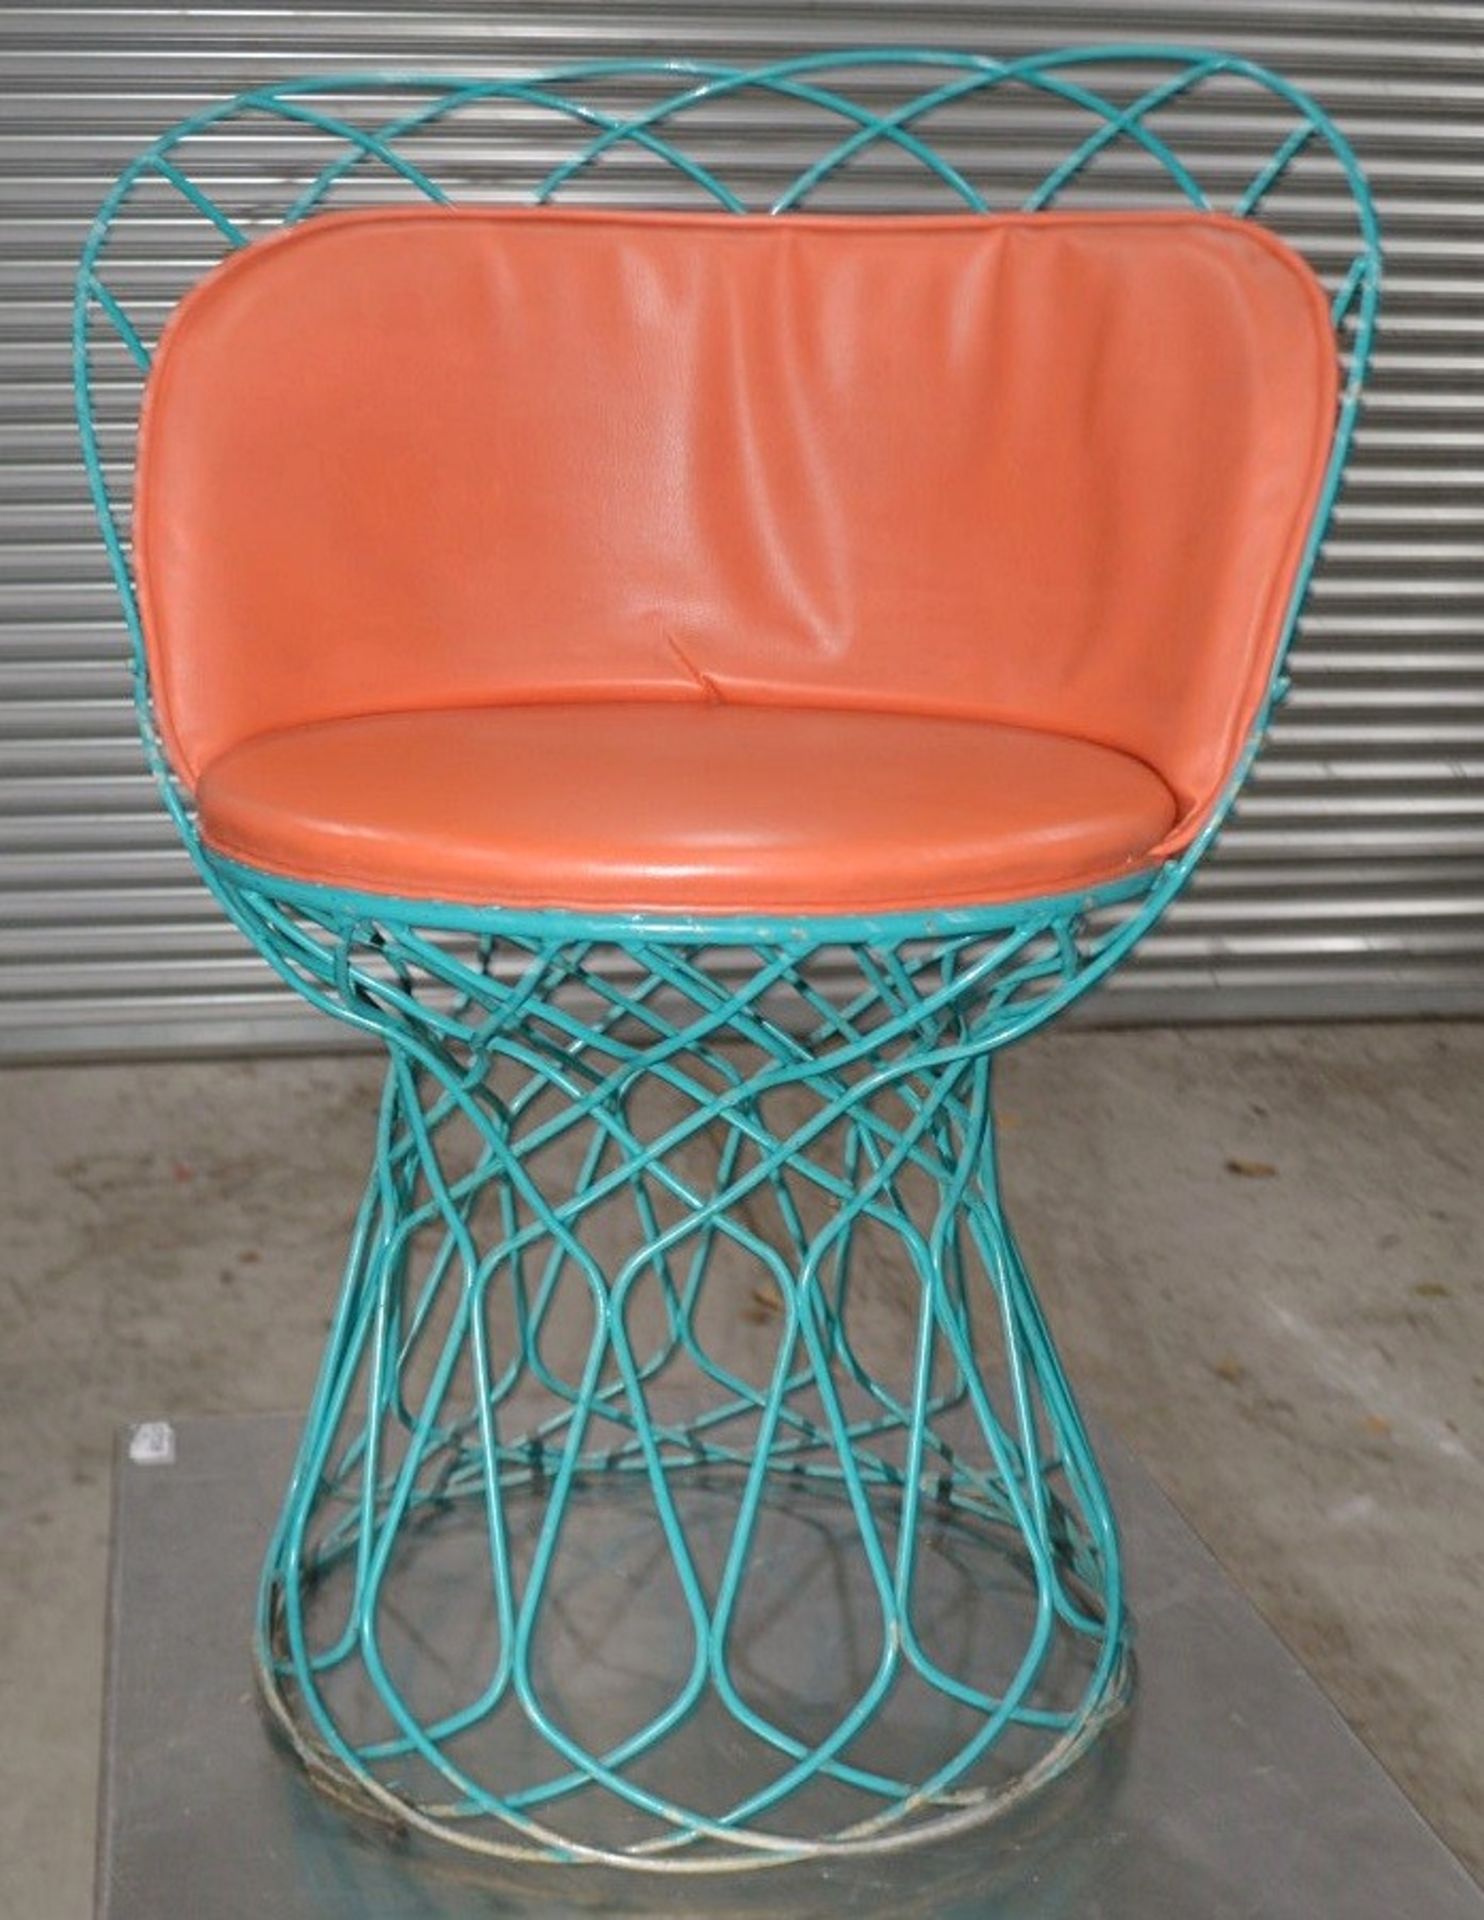 2 x Commercial Outdoor Wire Bistro Chairs With Padded Seats In Orange - Dimensions: H80 x W62 x D45c - Image 5 of 6